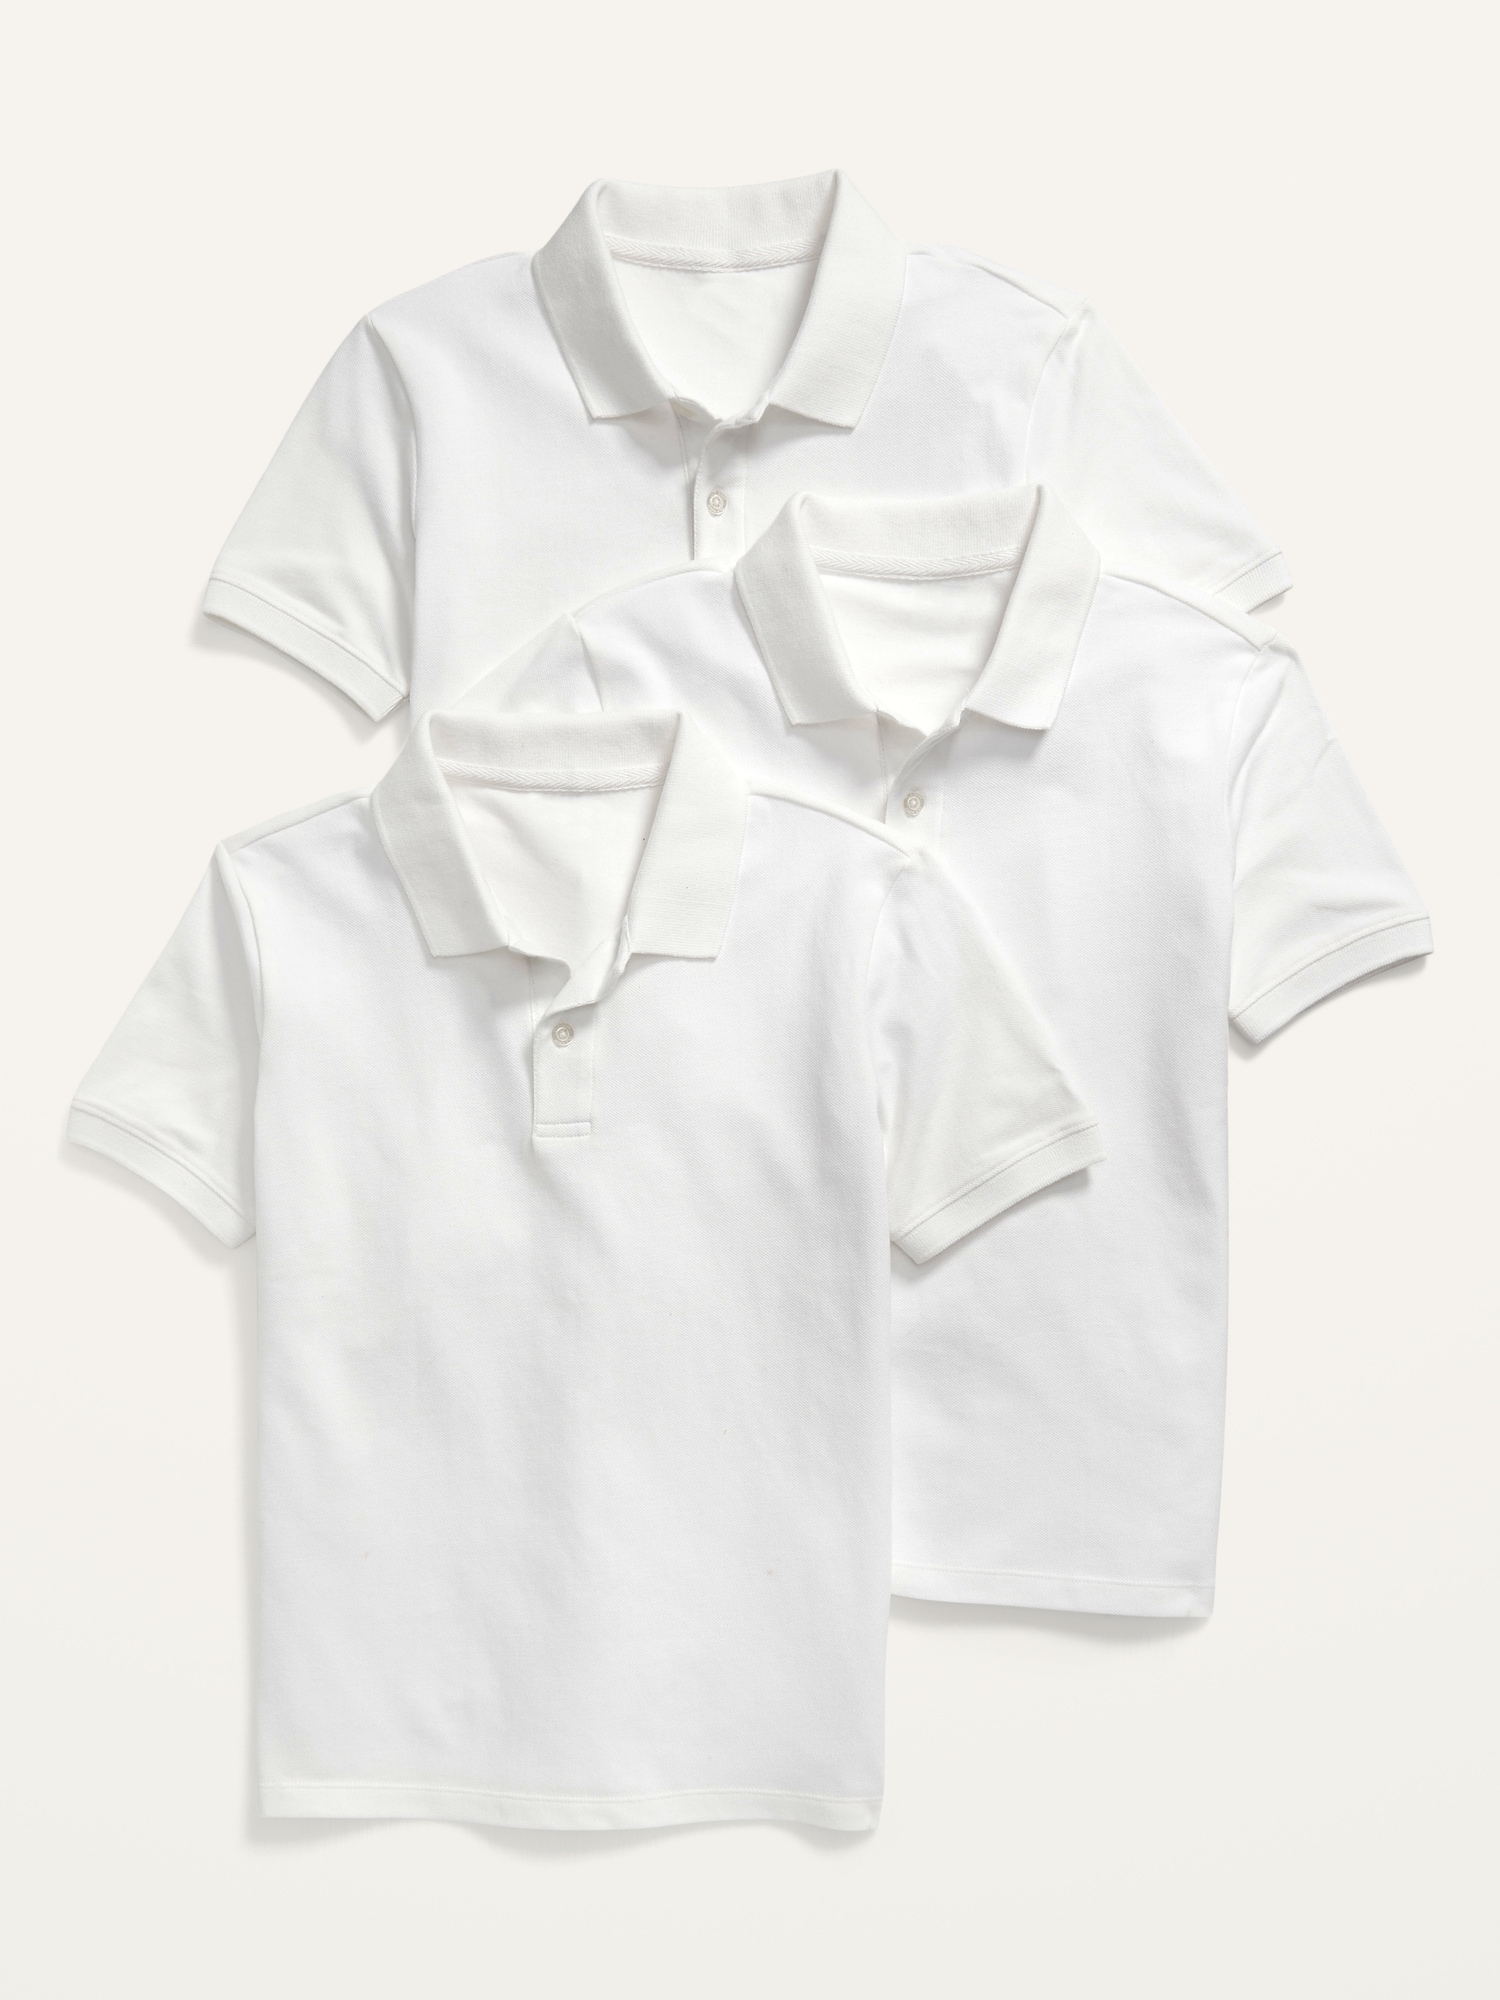 Old Navy School Uniform Polo Shirt 3-Pack for Boys white. 1